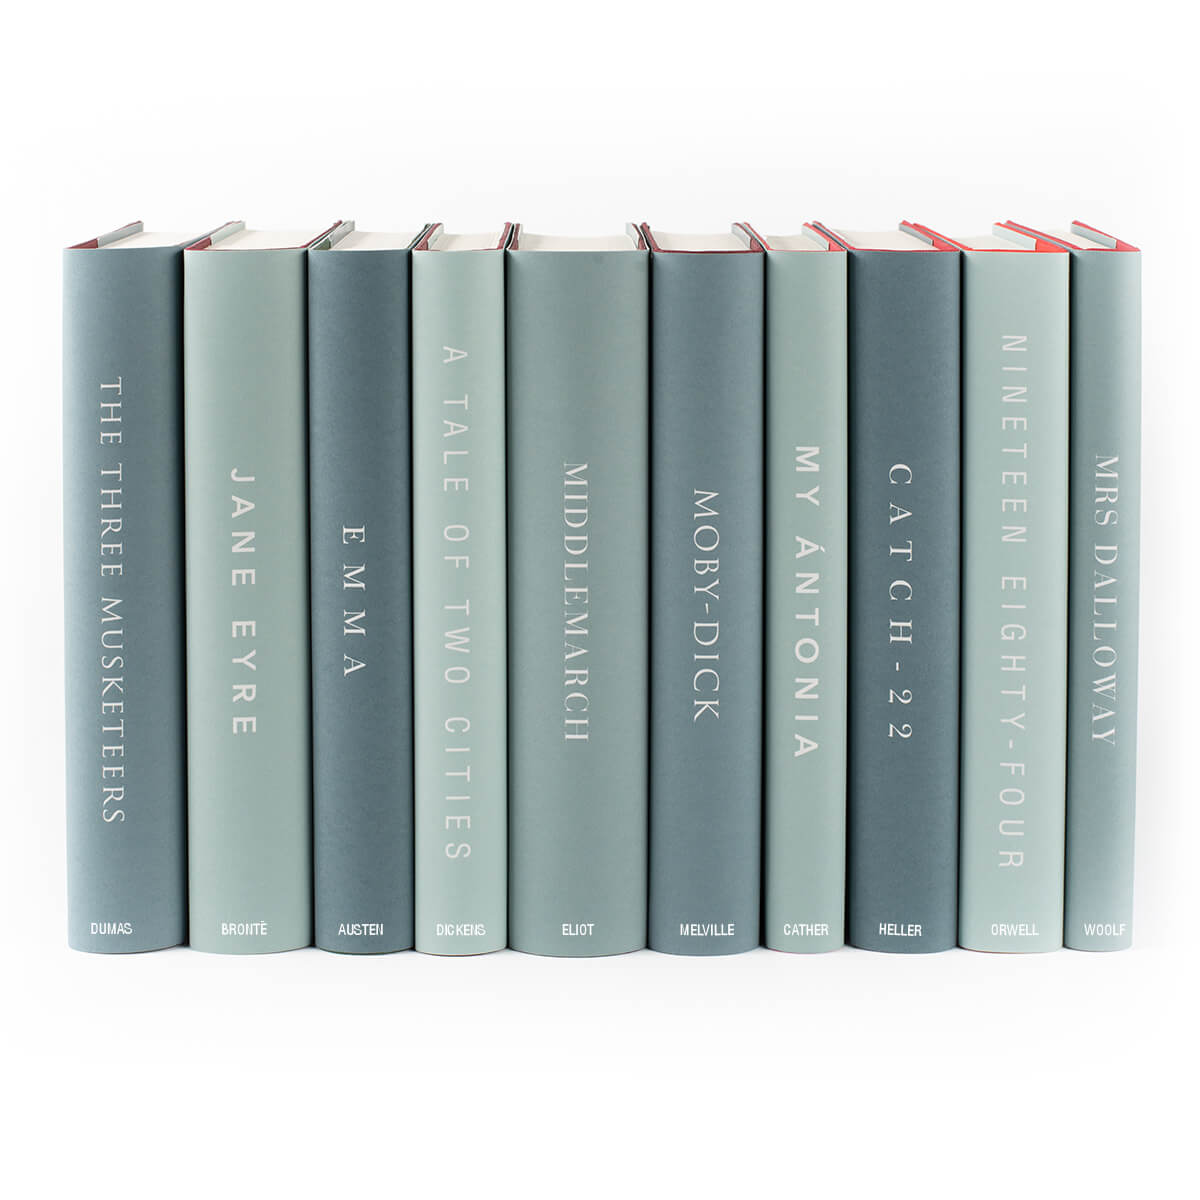 Everyman's Library Classics Library Series in Sets of 10 – Juniper Custom